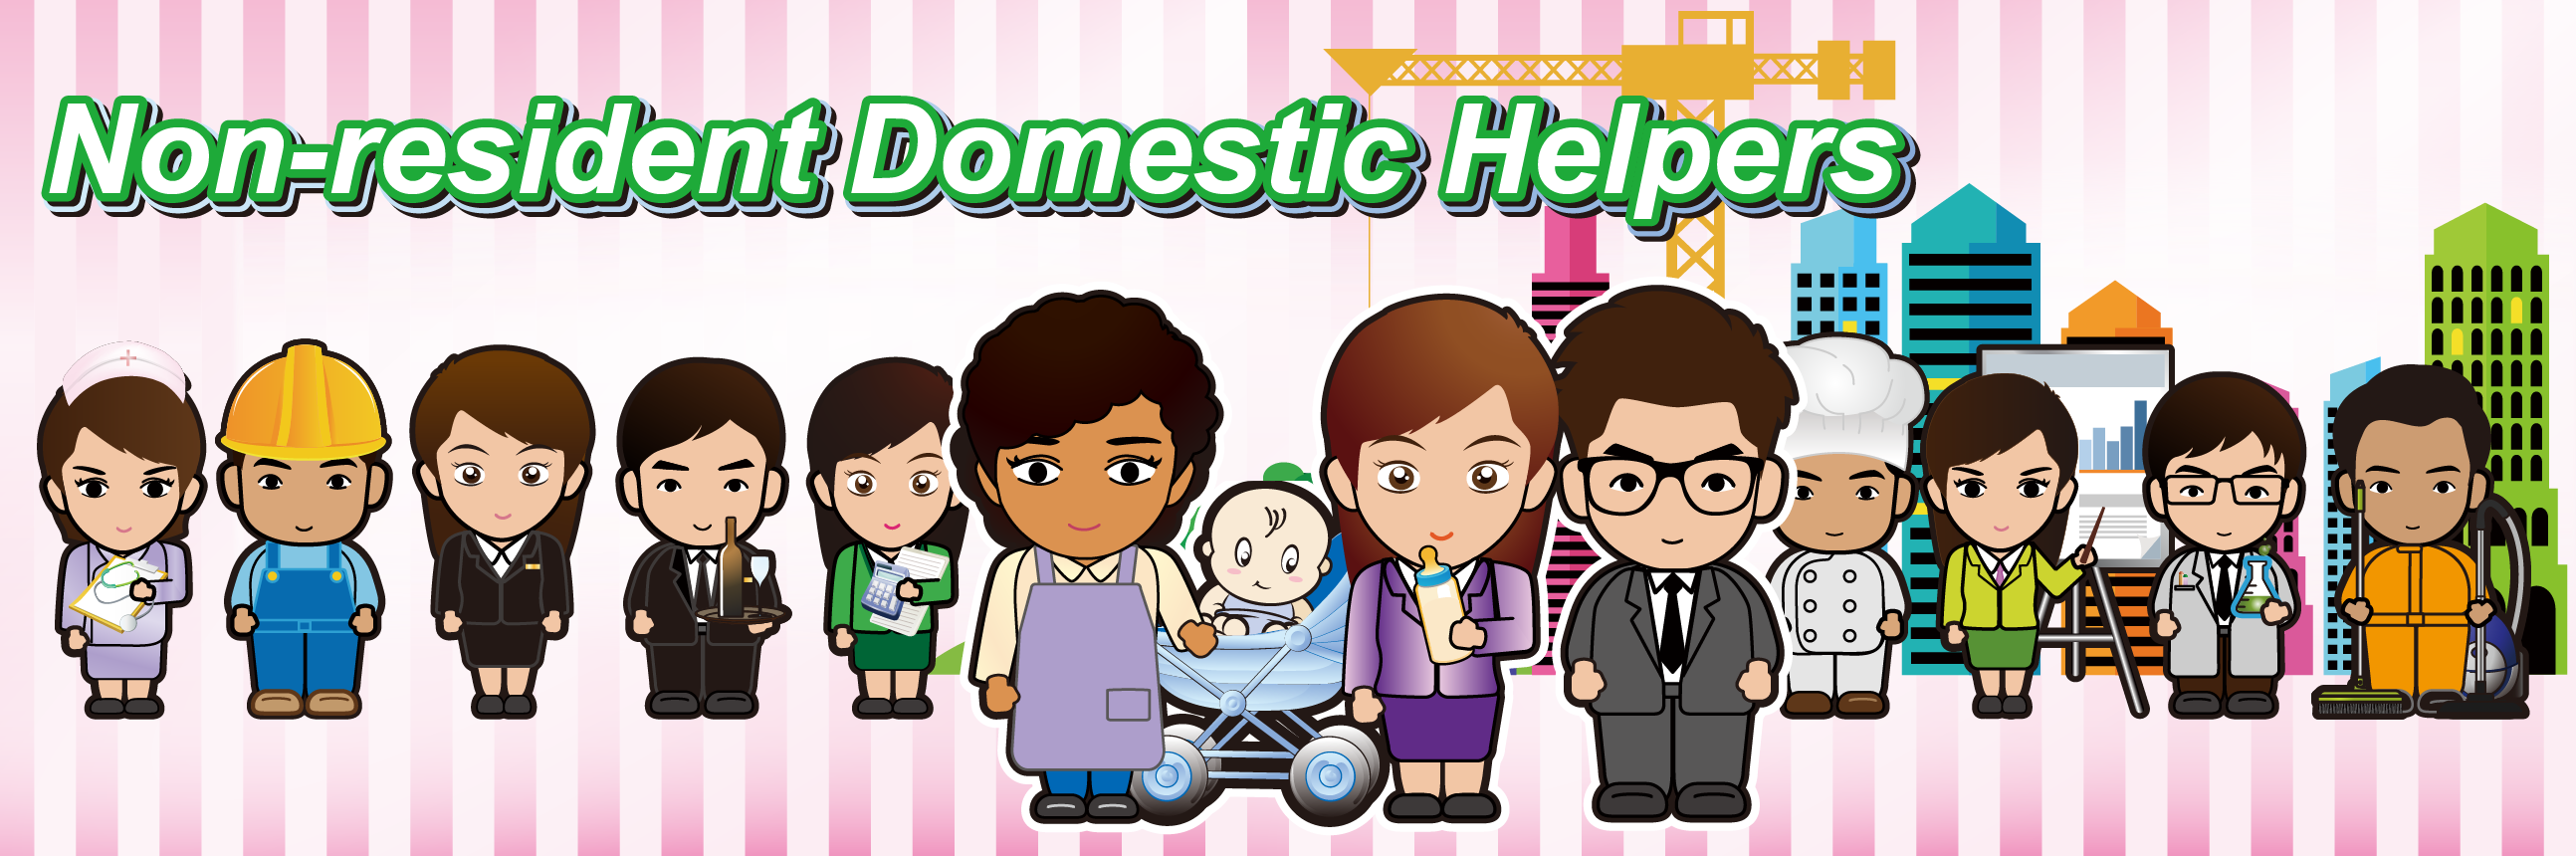 Non Resident Domestic Helpers